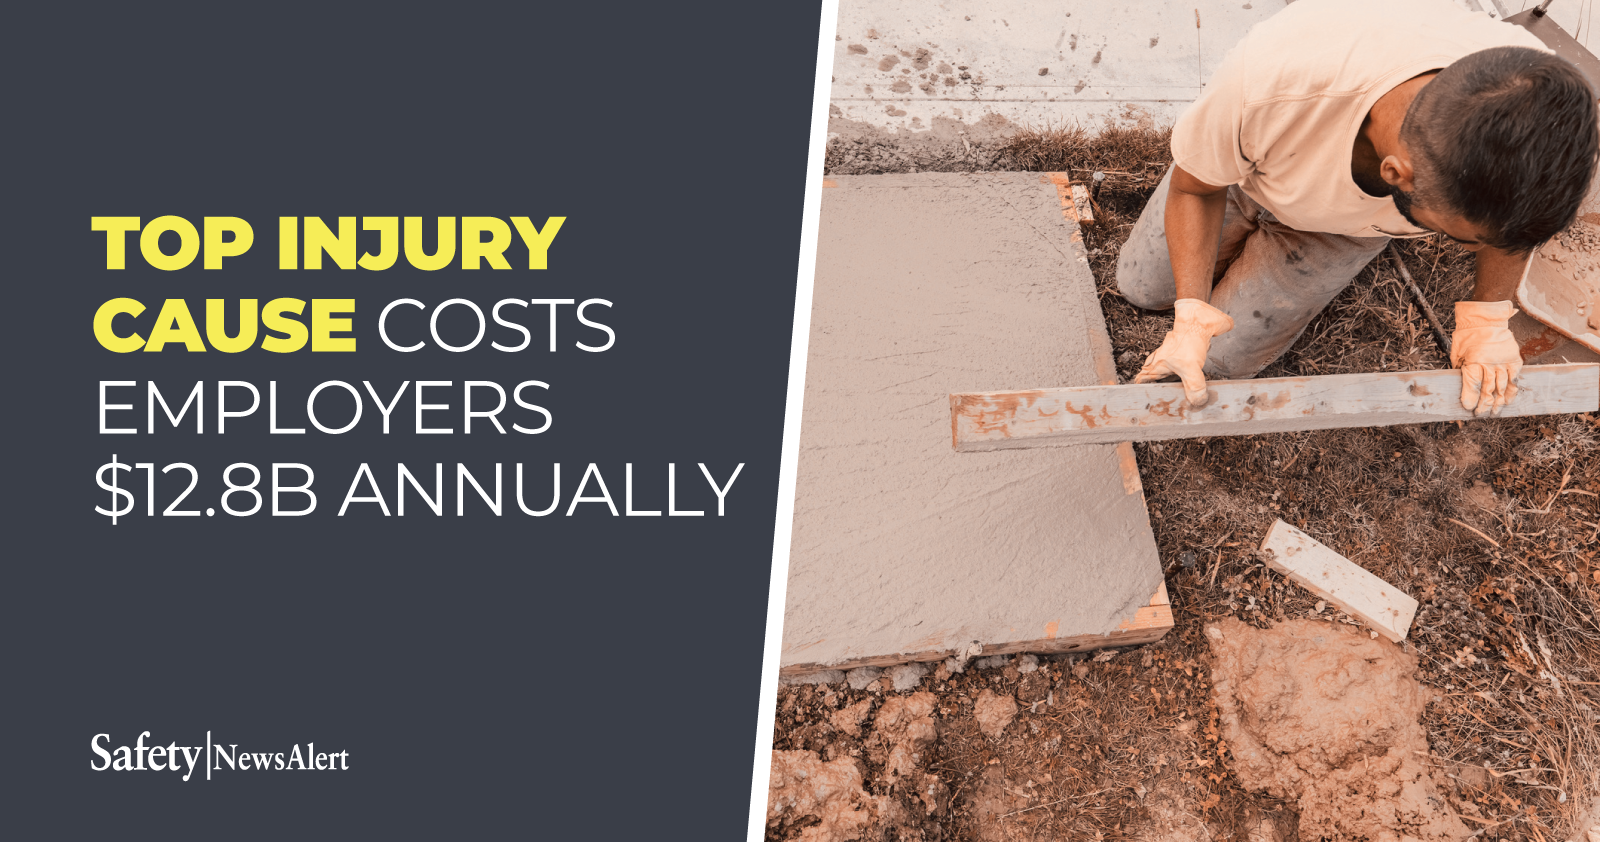 Top injury cause costs employers $12.8B annually